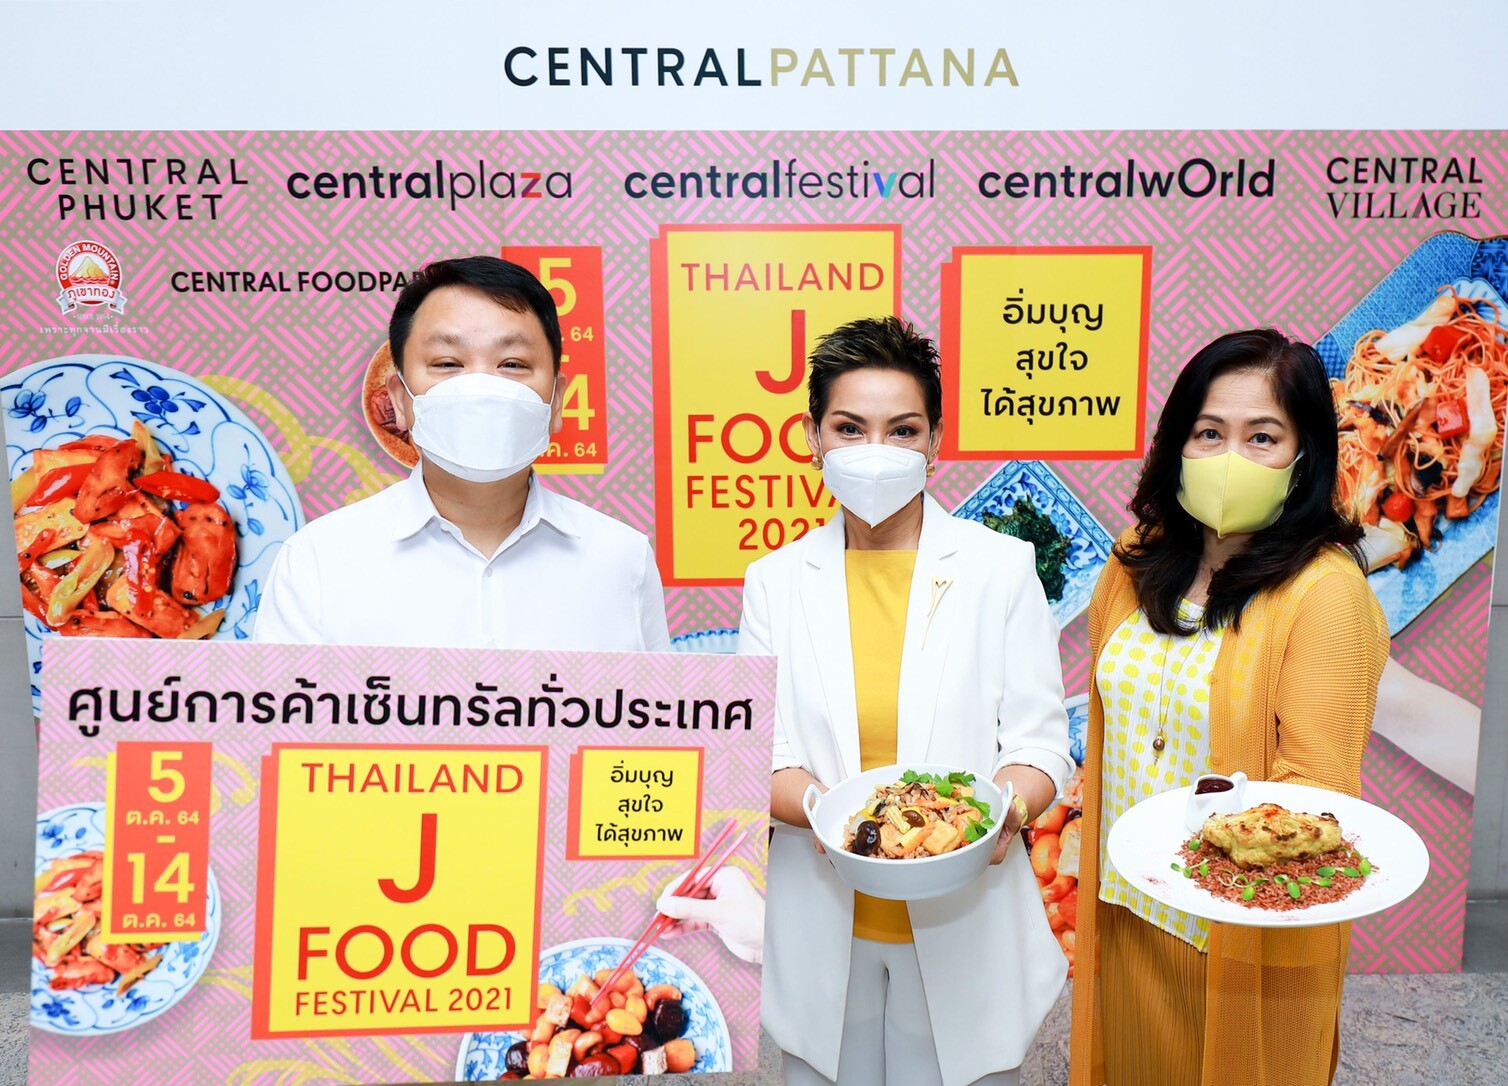 Unveiling the ultimate 'Thailand J Food Festival' at Central shopping centers nationwide, the leading destination for vegetarian food, with a variety of vegetarian food in one place from 5 to 14 October 2021